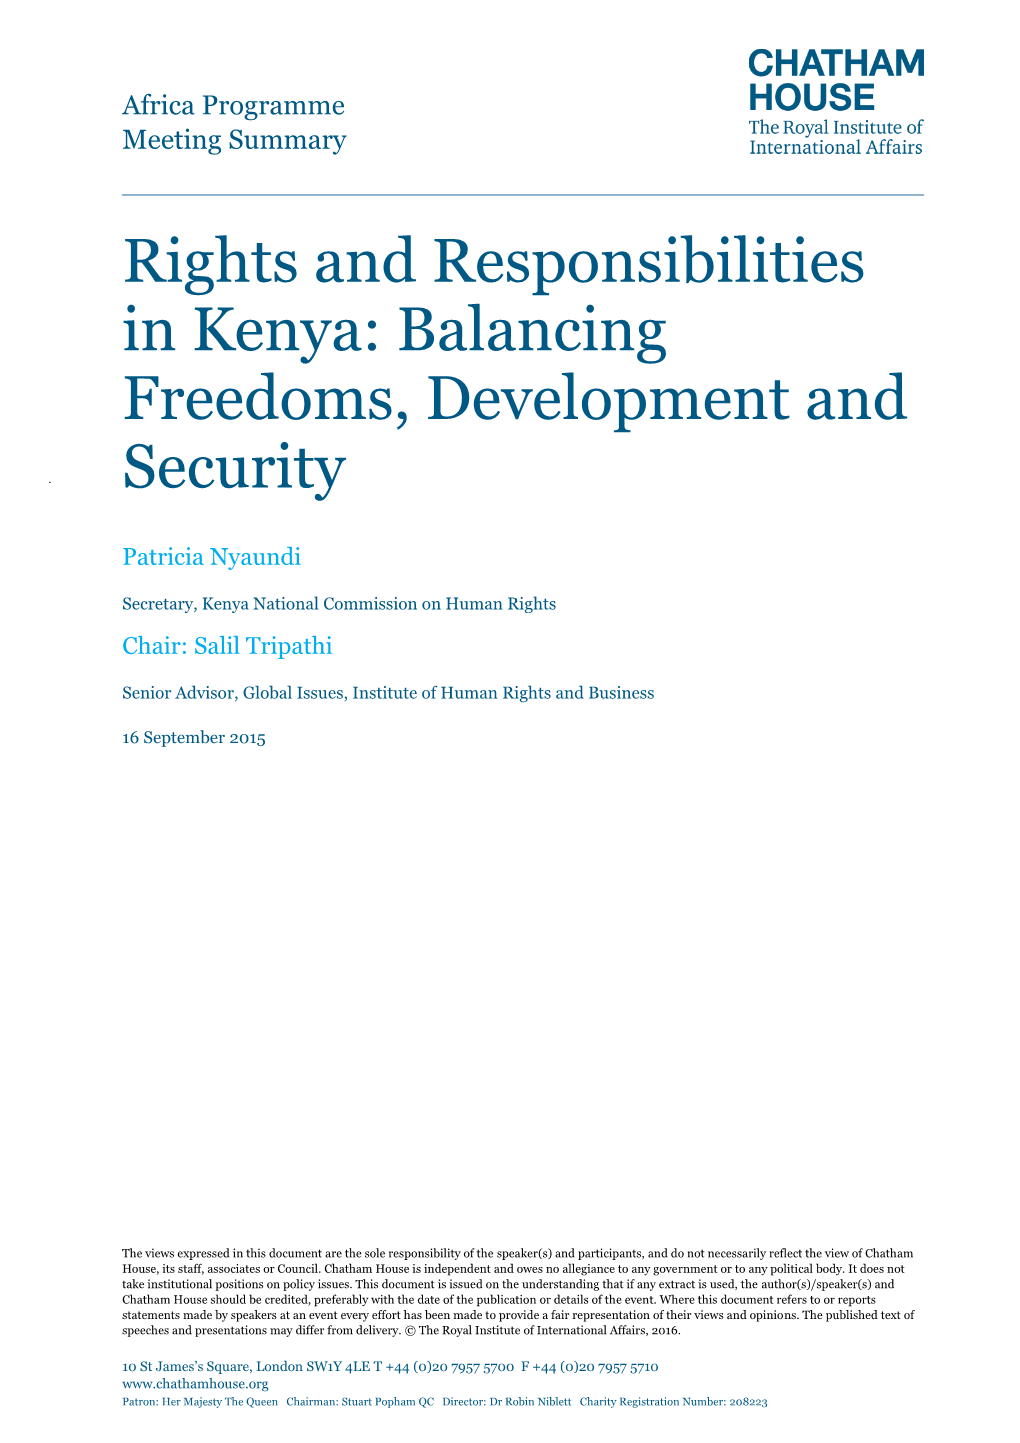 Rights and Responsibilities in Kenya: Balancing Freedoms, Development and Security